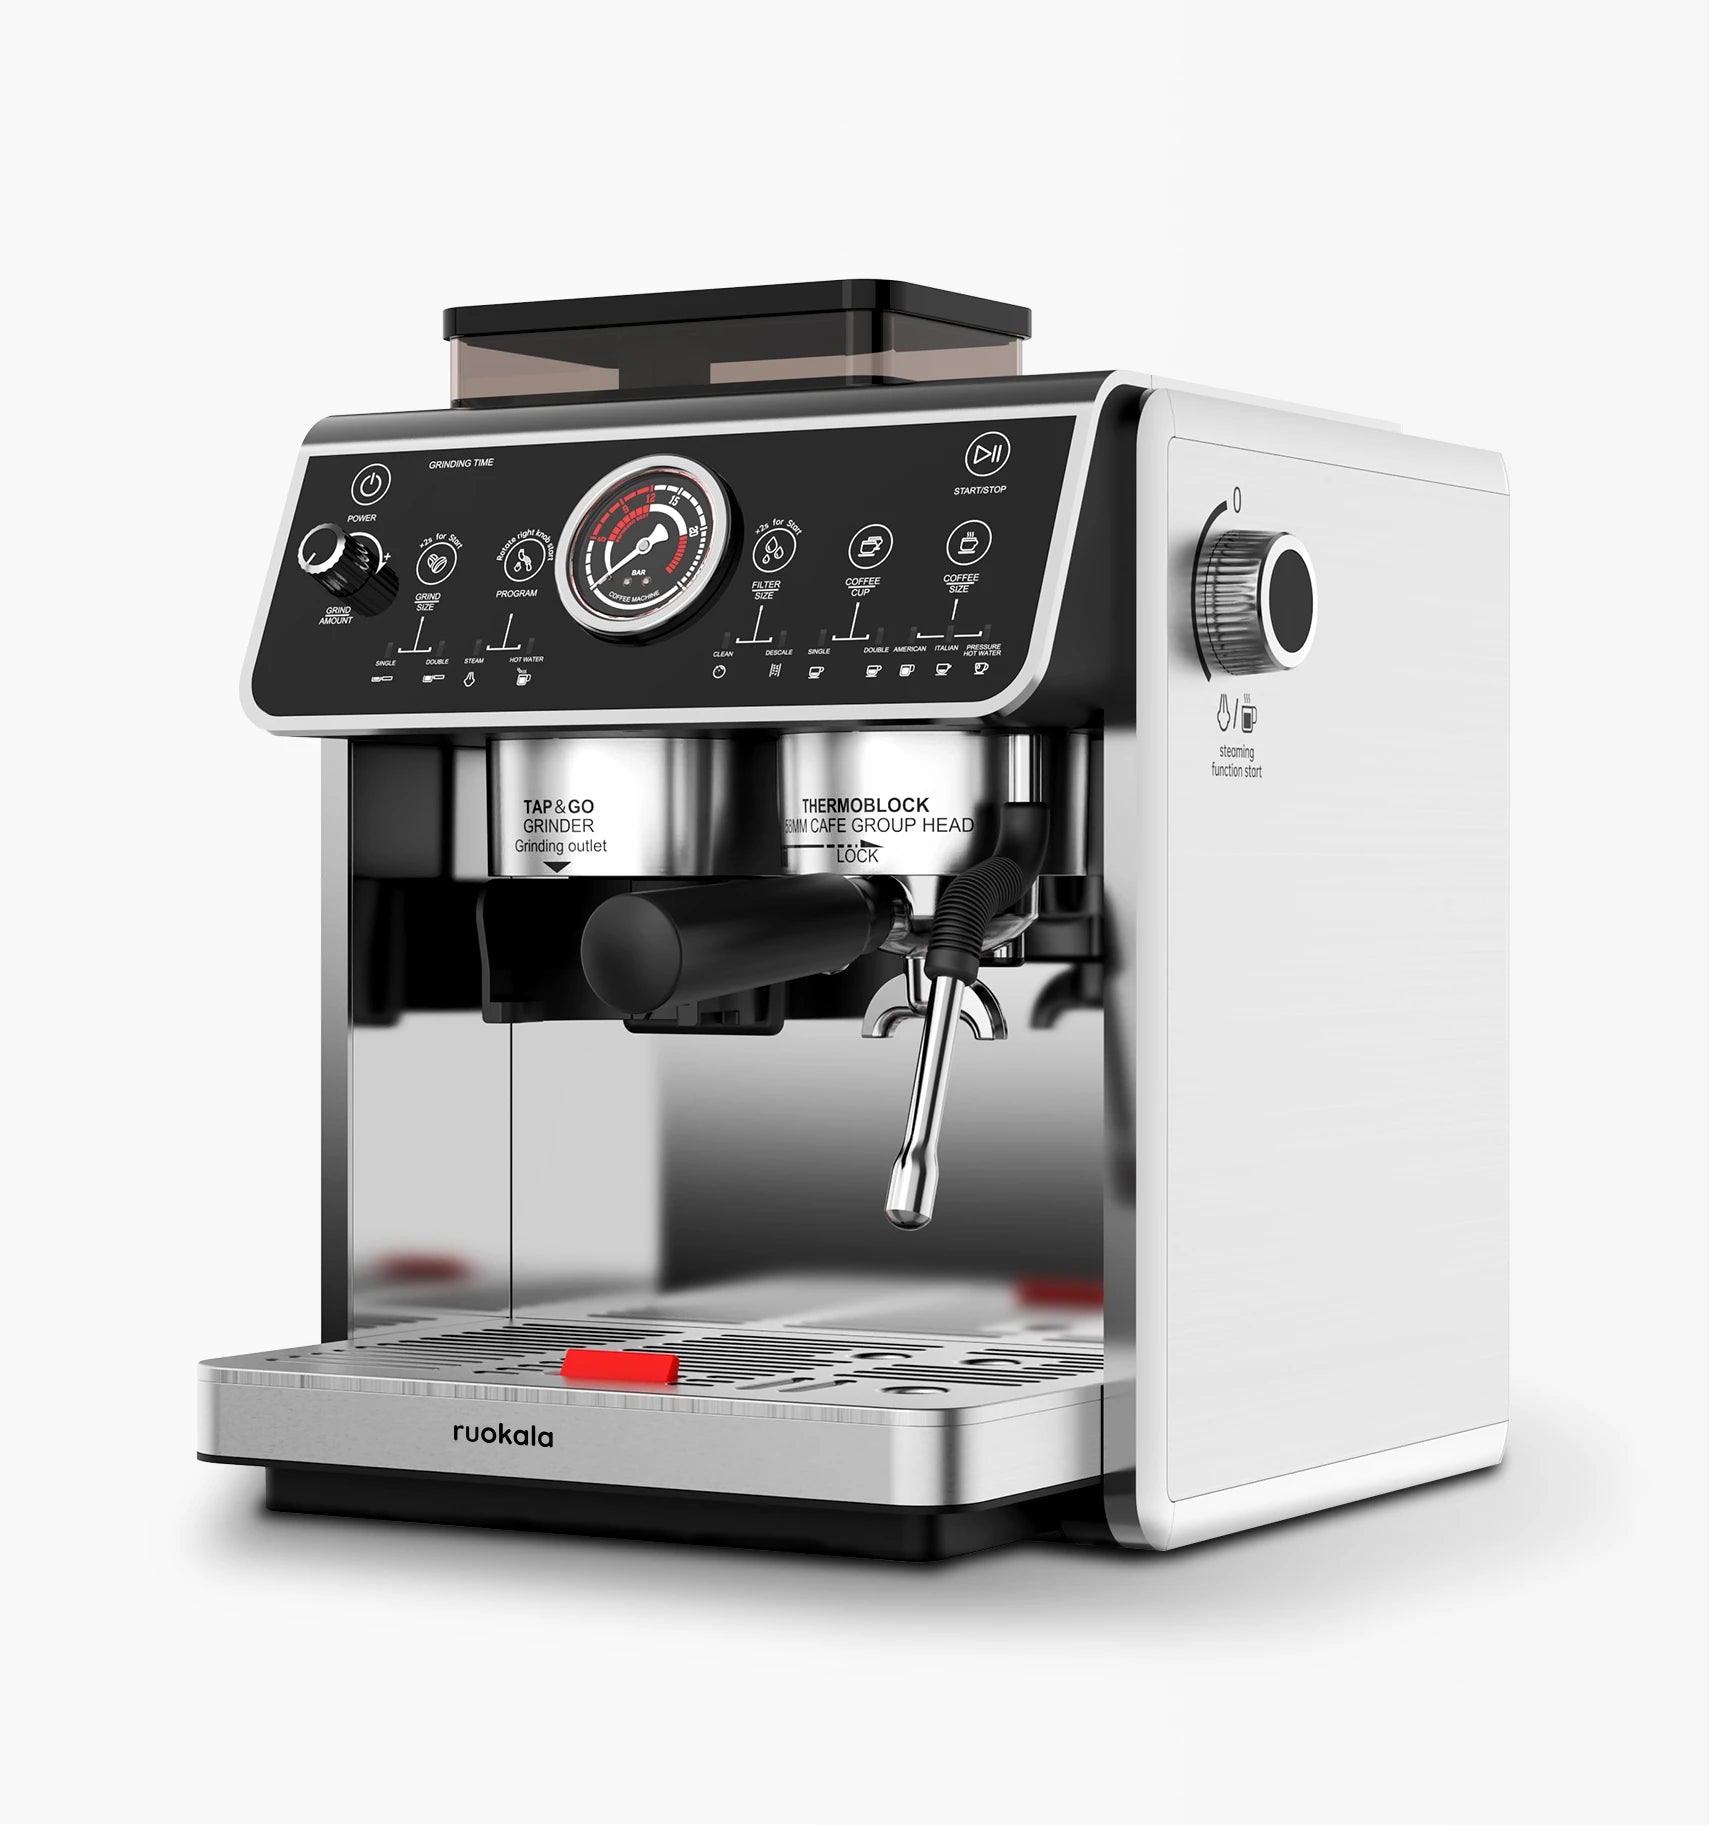 Automatic espresso machine with coffee grinder and programmable settings.